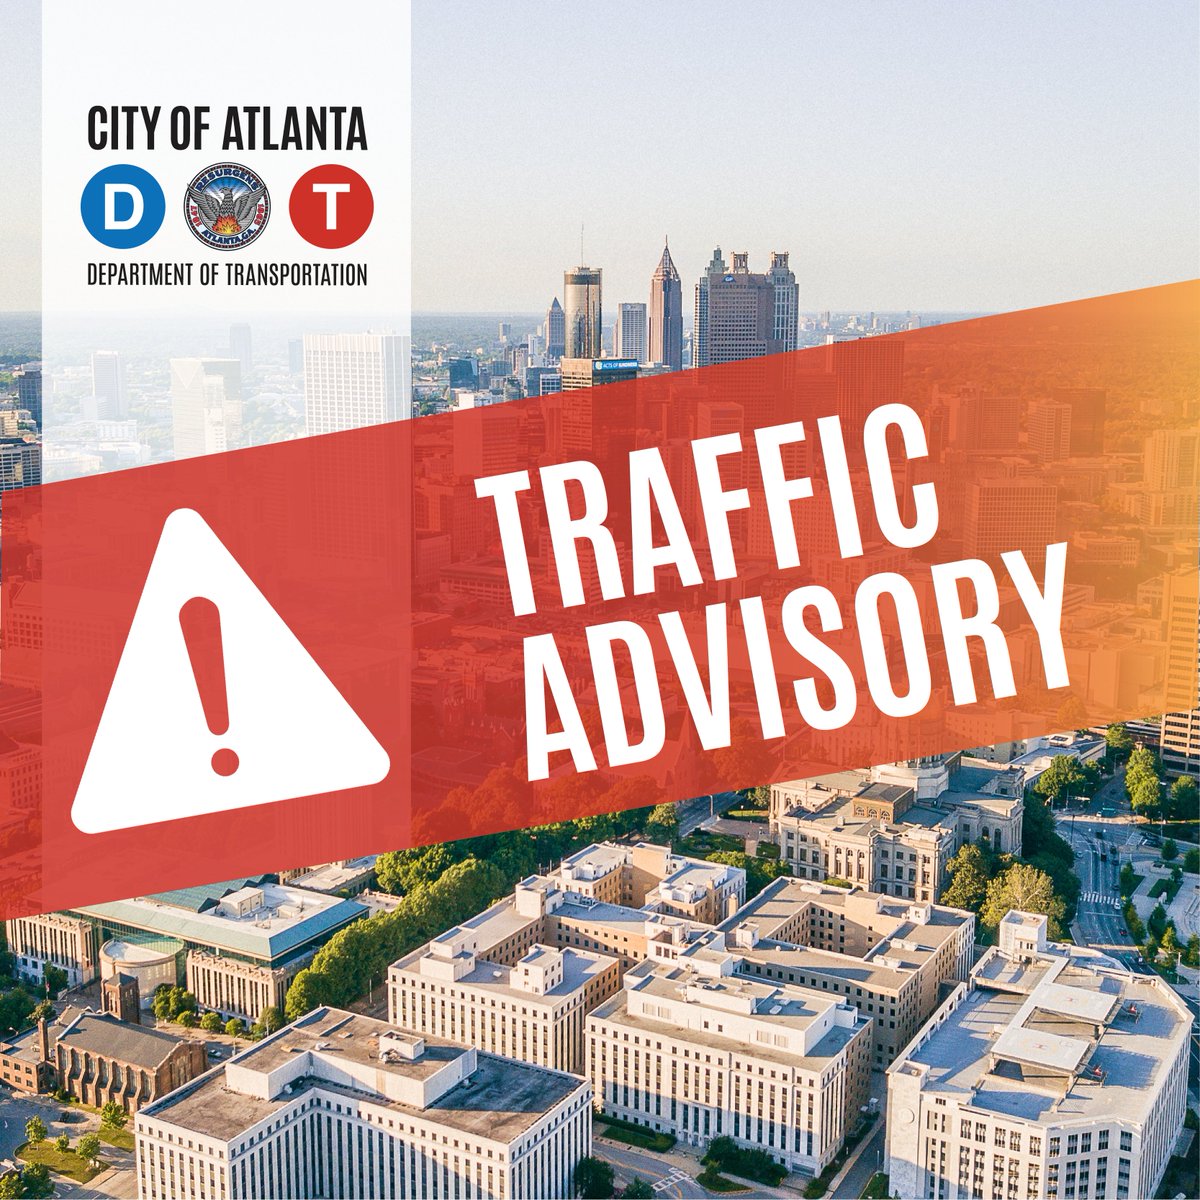 #AtlantaTraffic Advisory: Marietta Street NW between Brady Avenue NW and Howell Mill Road NW will be closed from 9:00 a.m. on Friday, April 12 until 4:00 p.m. on Sunday, April 14 to accommodate construction activities in the area. #ATLTraffic